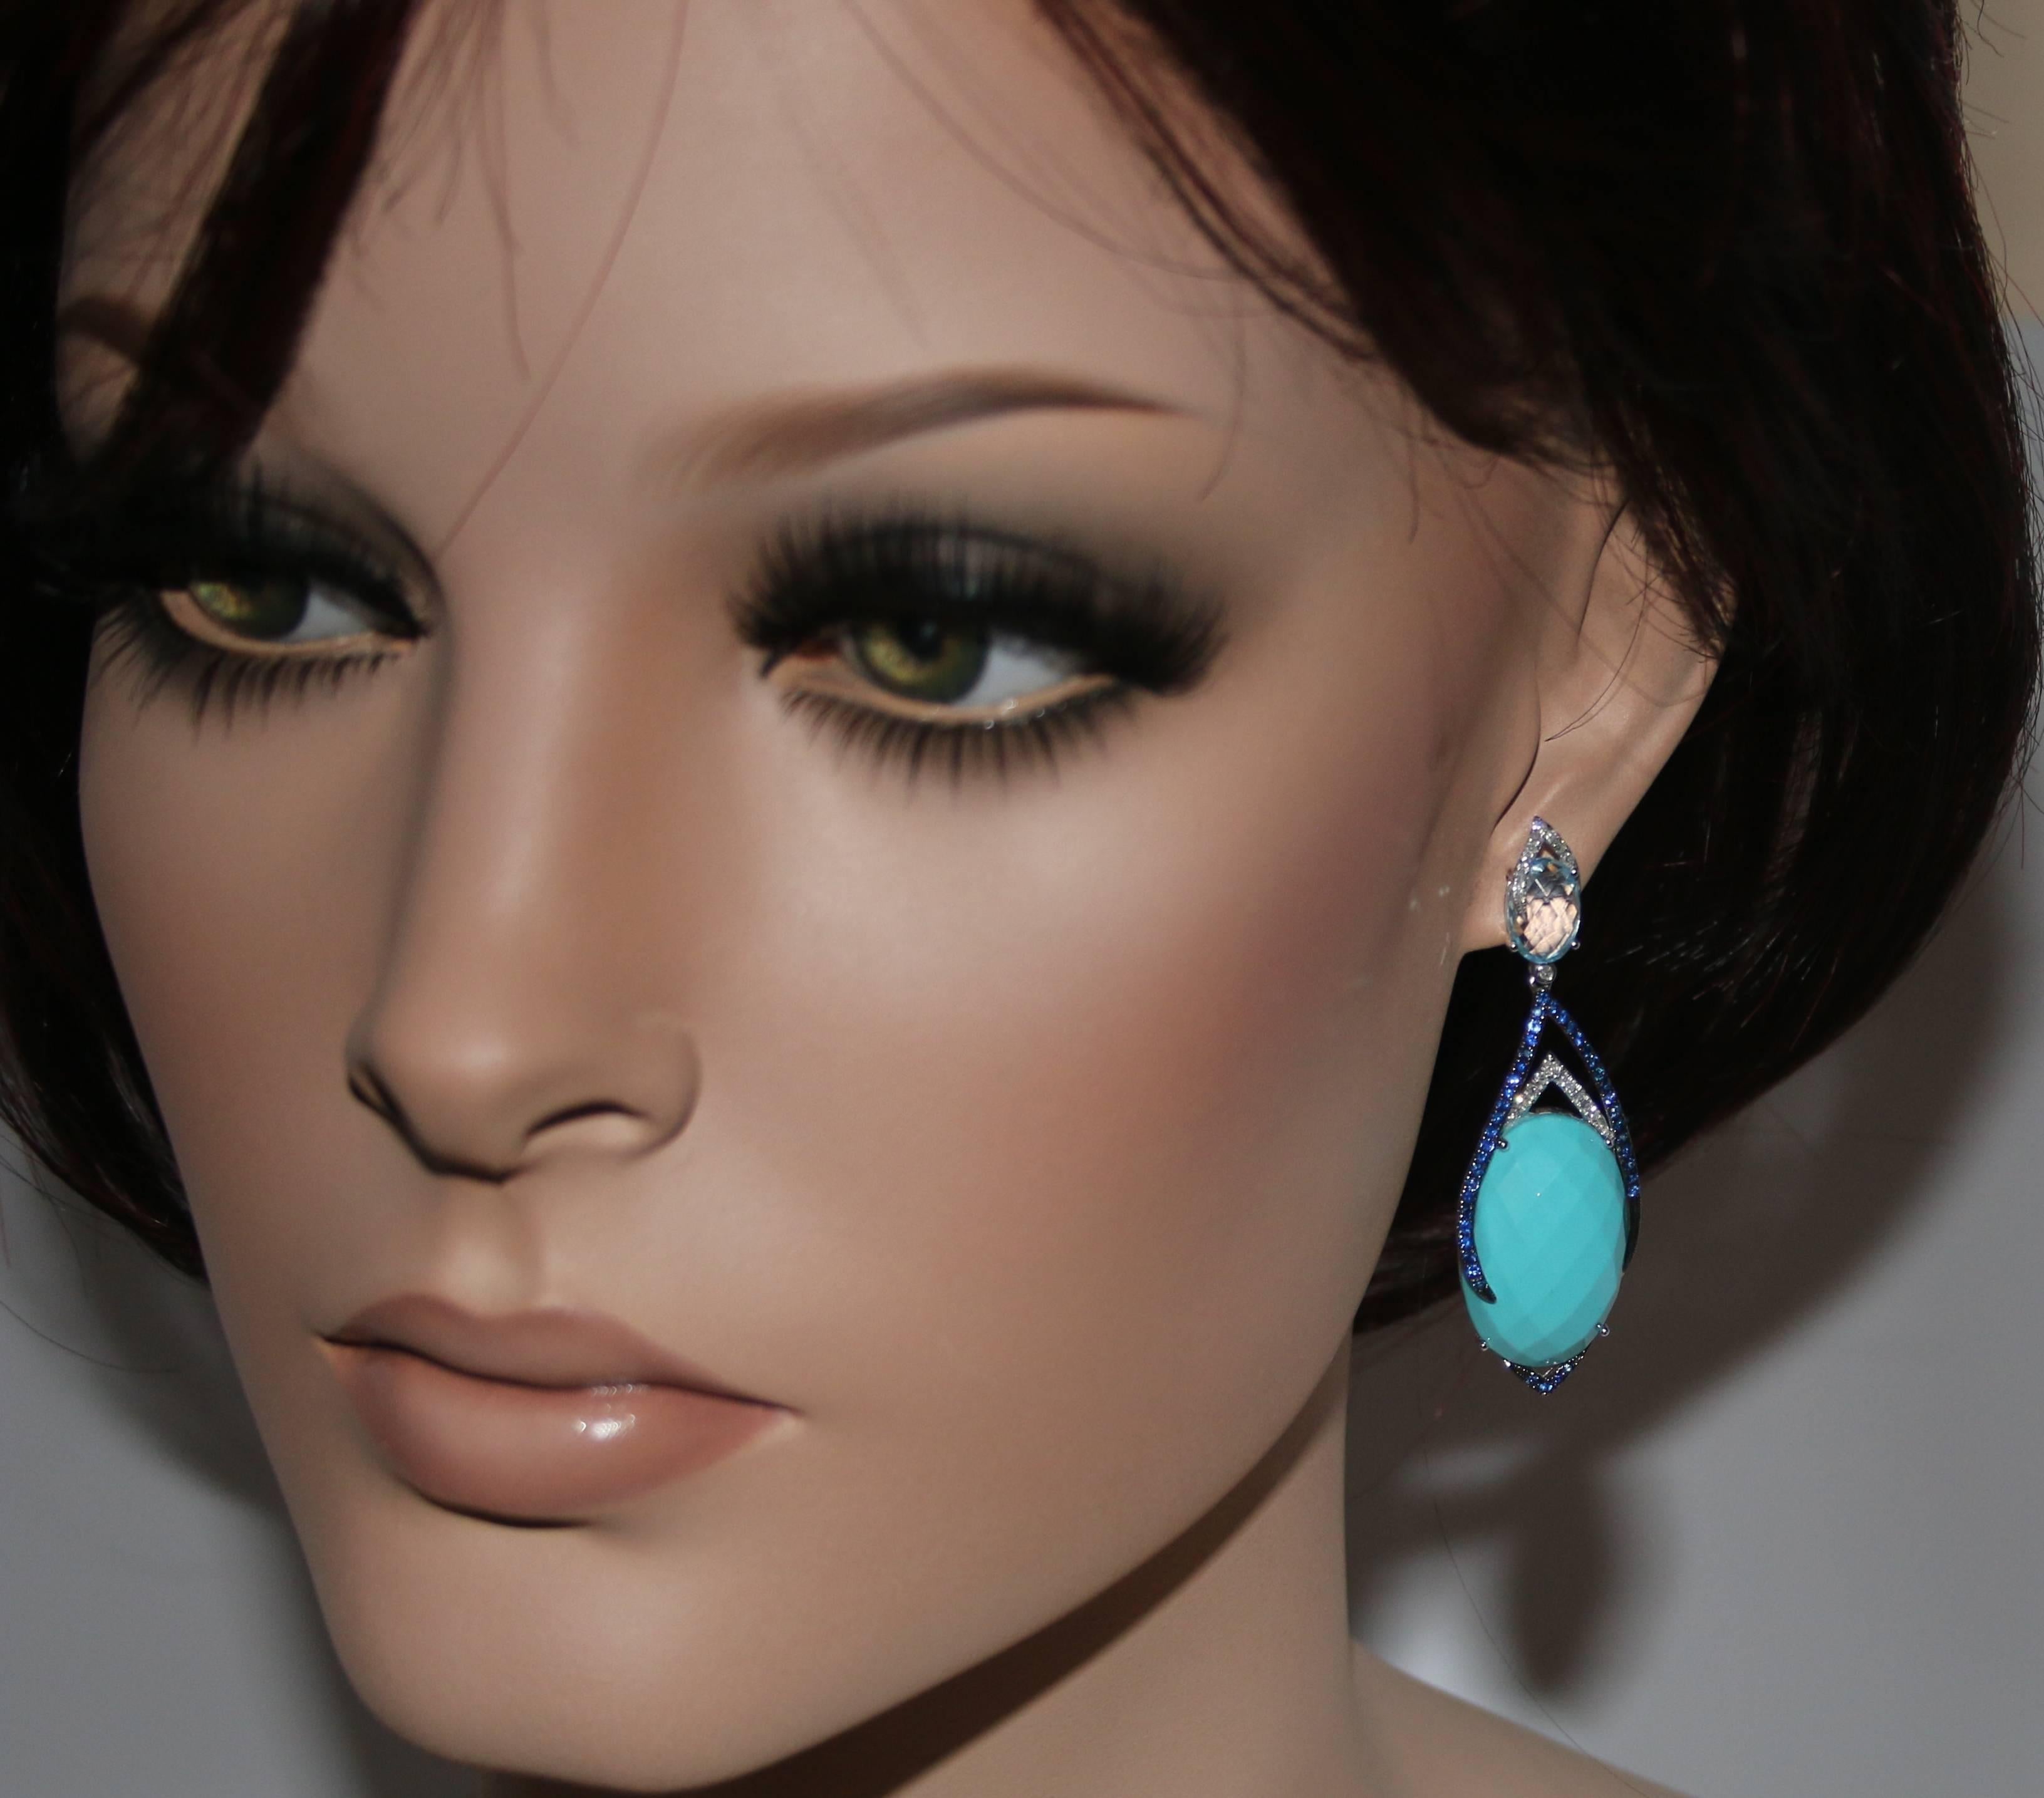 Stunning Turquoise Drop Earrings
The earrings are 14K White Gold
There are 0.33 Carats In Diamonds G/H SI
There are 0.82 Carats Blue Sapphires
There are 4.00 Carats Blue Topaz
There are 34.95 Carats Reconstituted Blue Turquoise
The earrings are